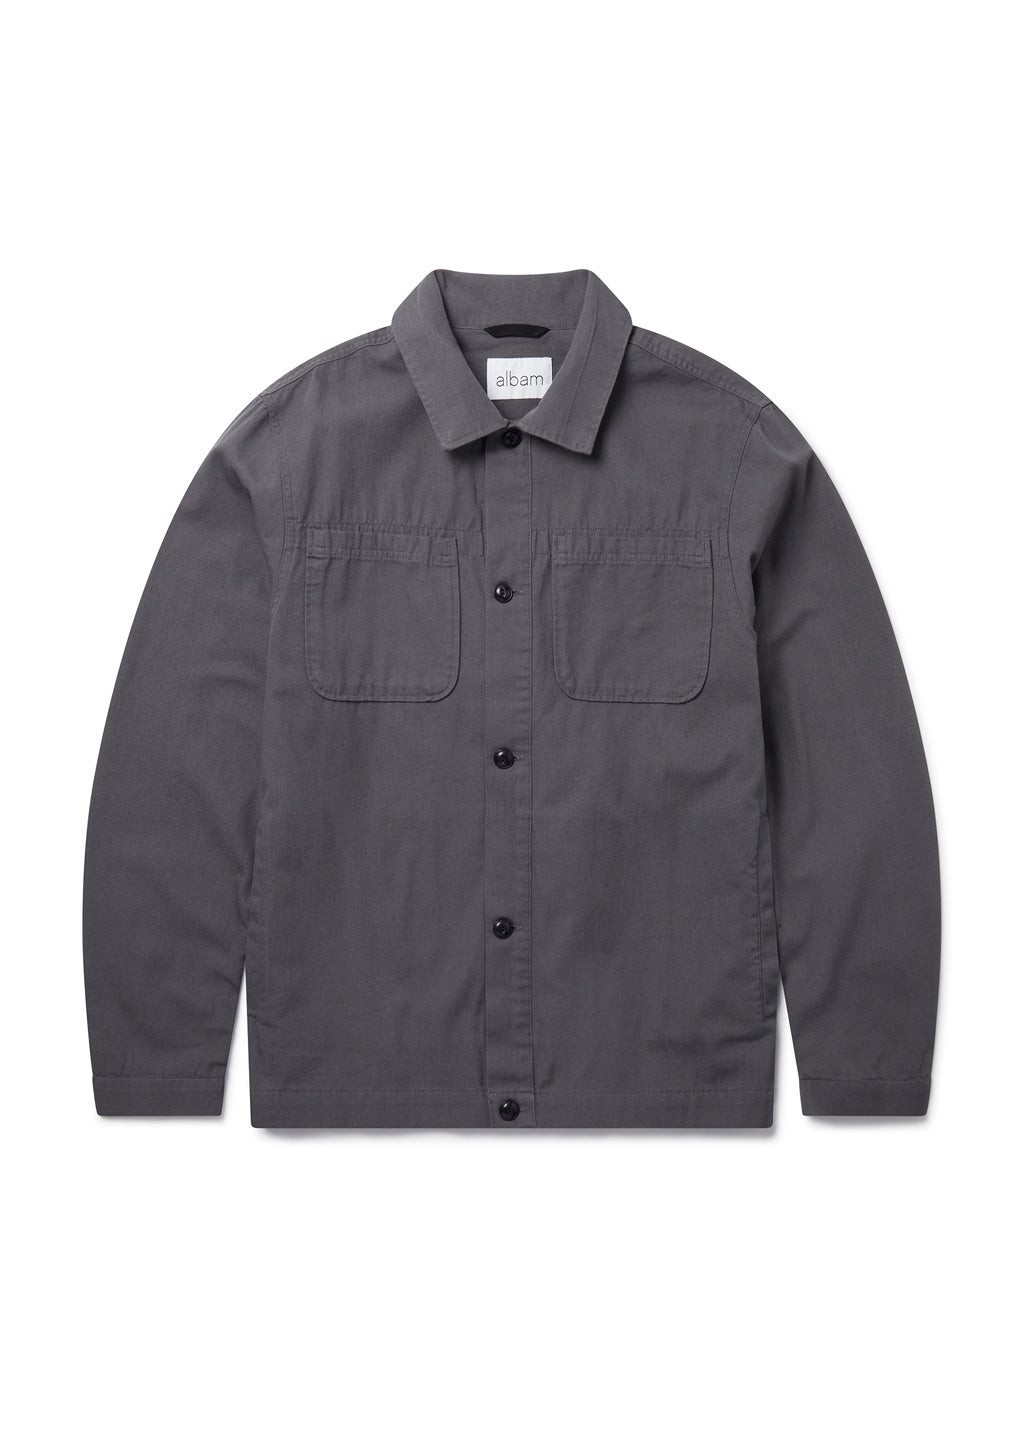 Sanded Canvas Work Shirt in Charcoal – albam Clothing